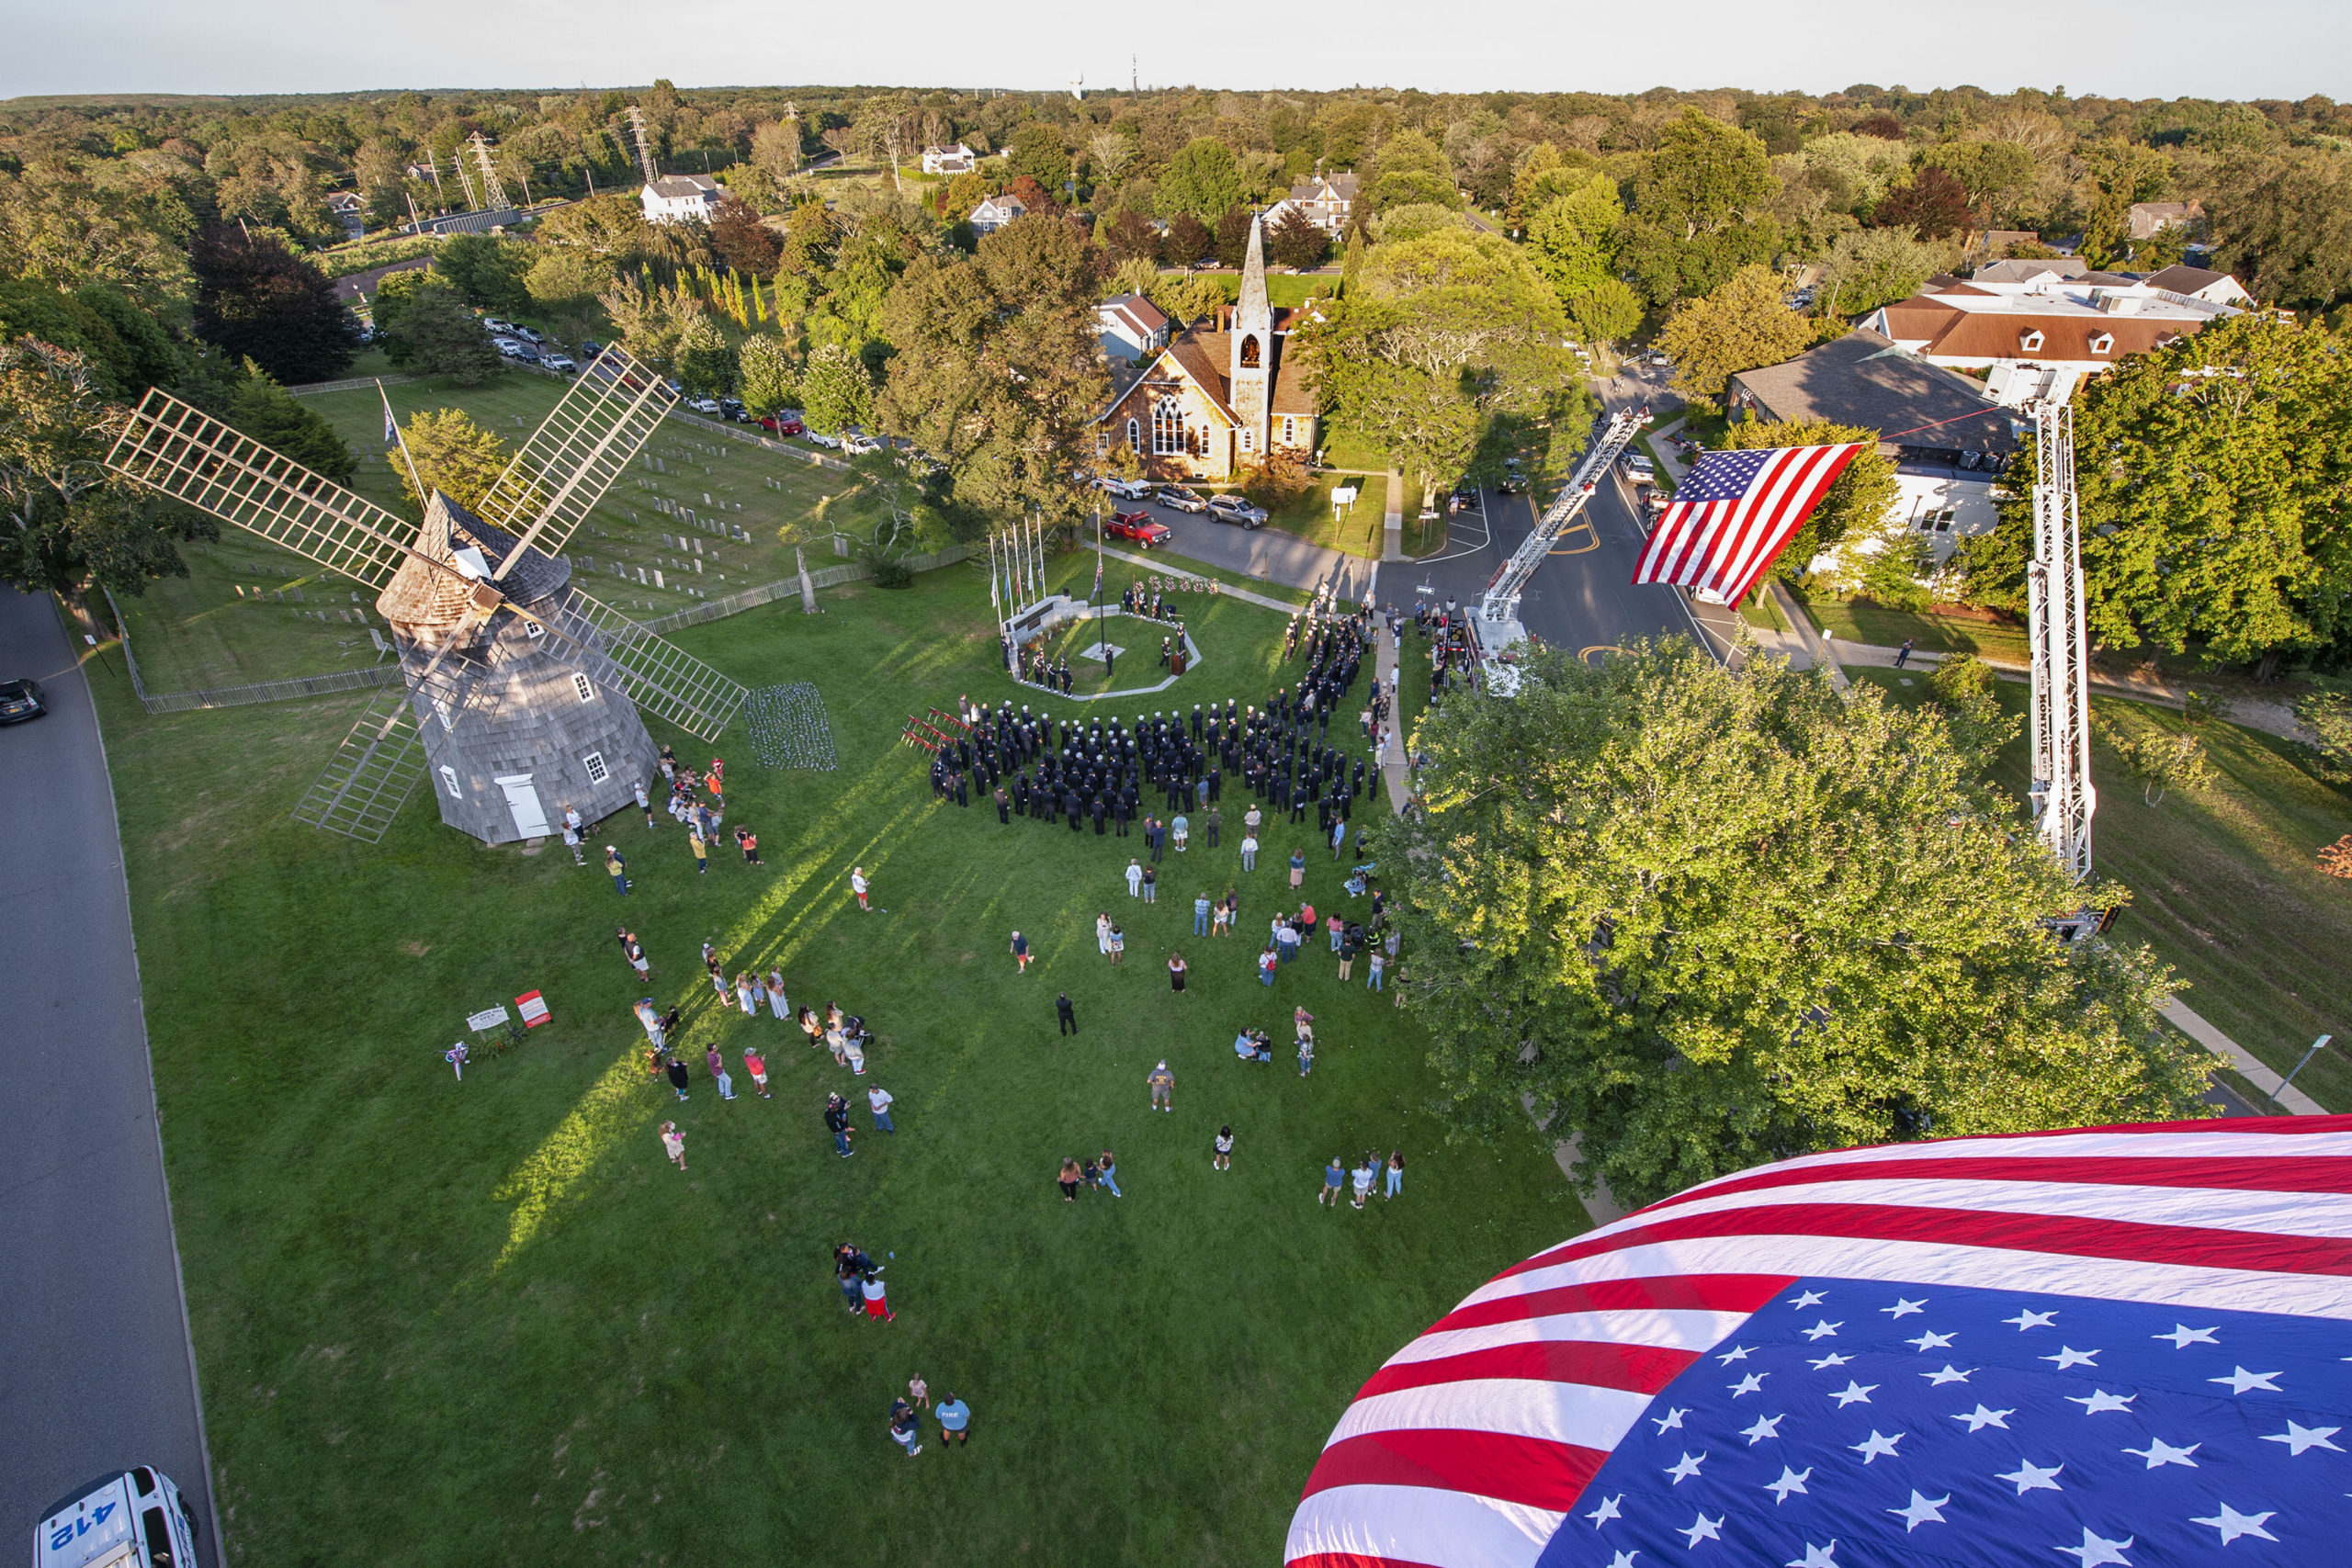 Large American flags fly over the East Hampton Village Green and Montauk Highway - courtesy of the East Hampton,  Sag Harbor, Bridgehampton and Montauk Fire Departments - during a ceremony commemorating the 20th anniversary of the attack on the World Trade Center, held on the Village Green in East Hampton and attended by 11 different East End fire, police and EMS agencies on Saturday afternoon.